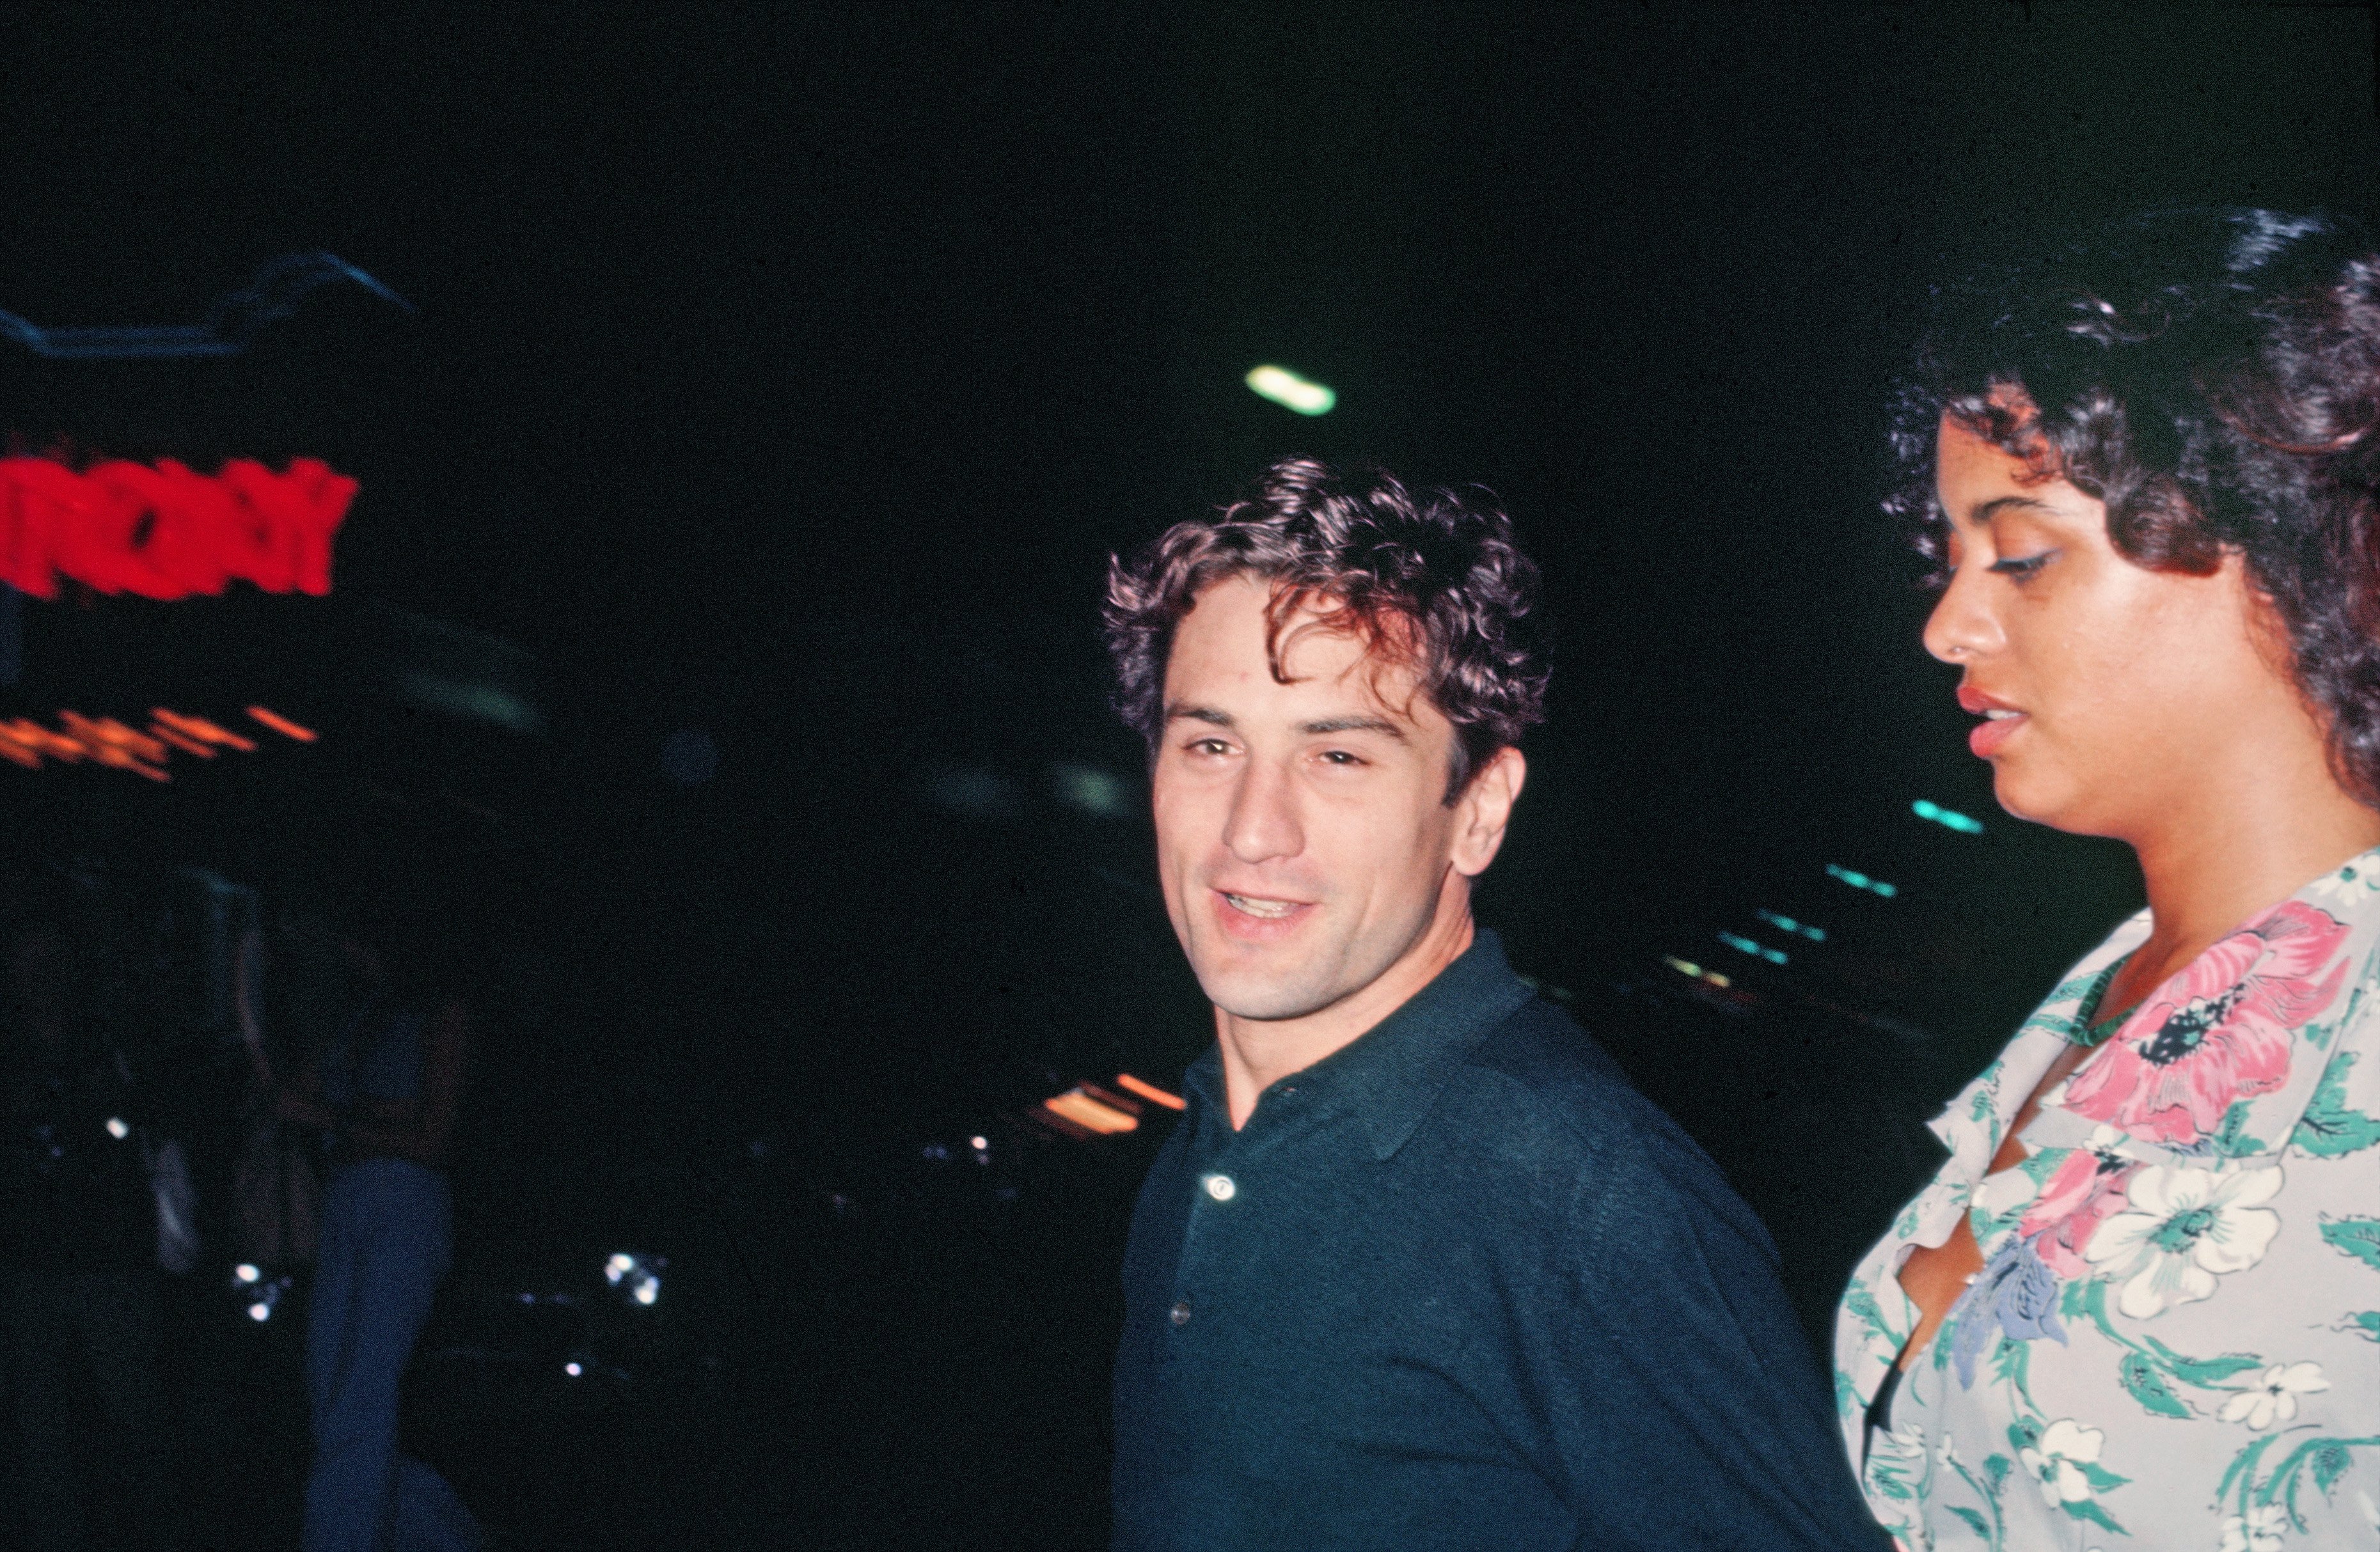 Robert De Niro and Diahnne Abbott spotted at the Roxy Theater in the mid-1970s in Los Angeles, California. / Source: Getty Images